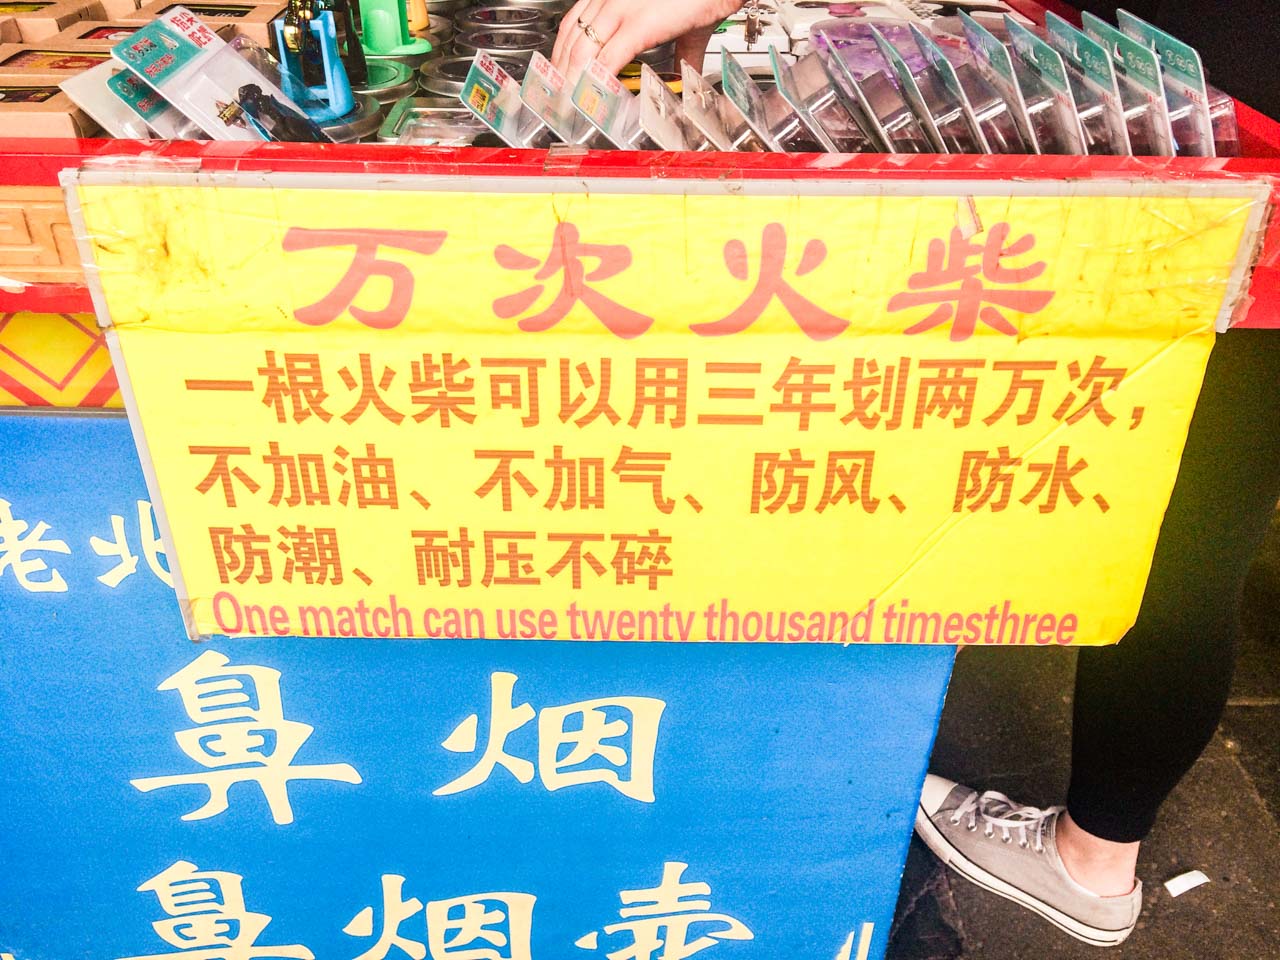 A funny Chinese translation sign at a souvenir shop in Beijing, China